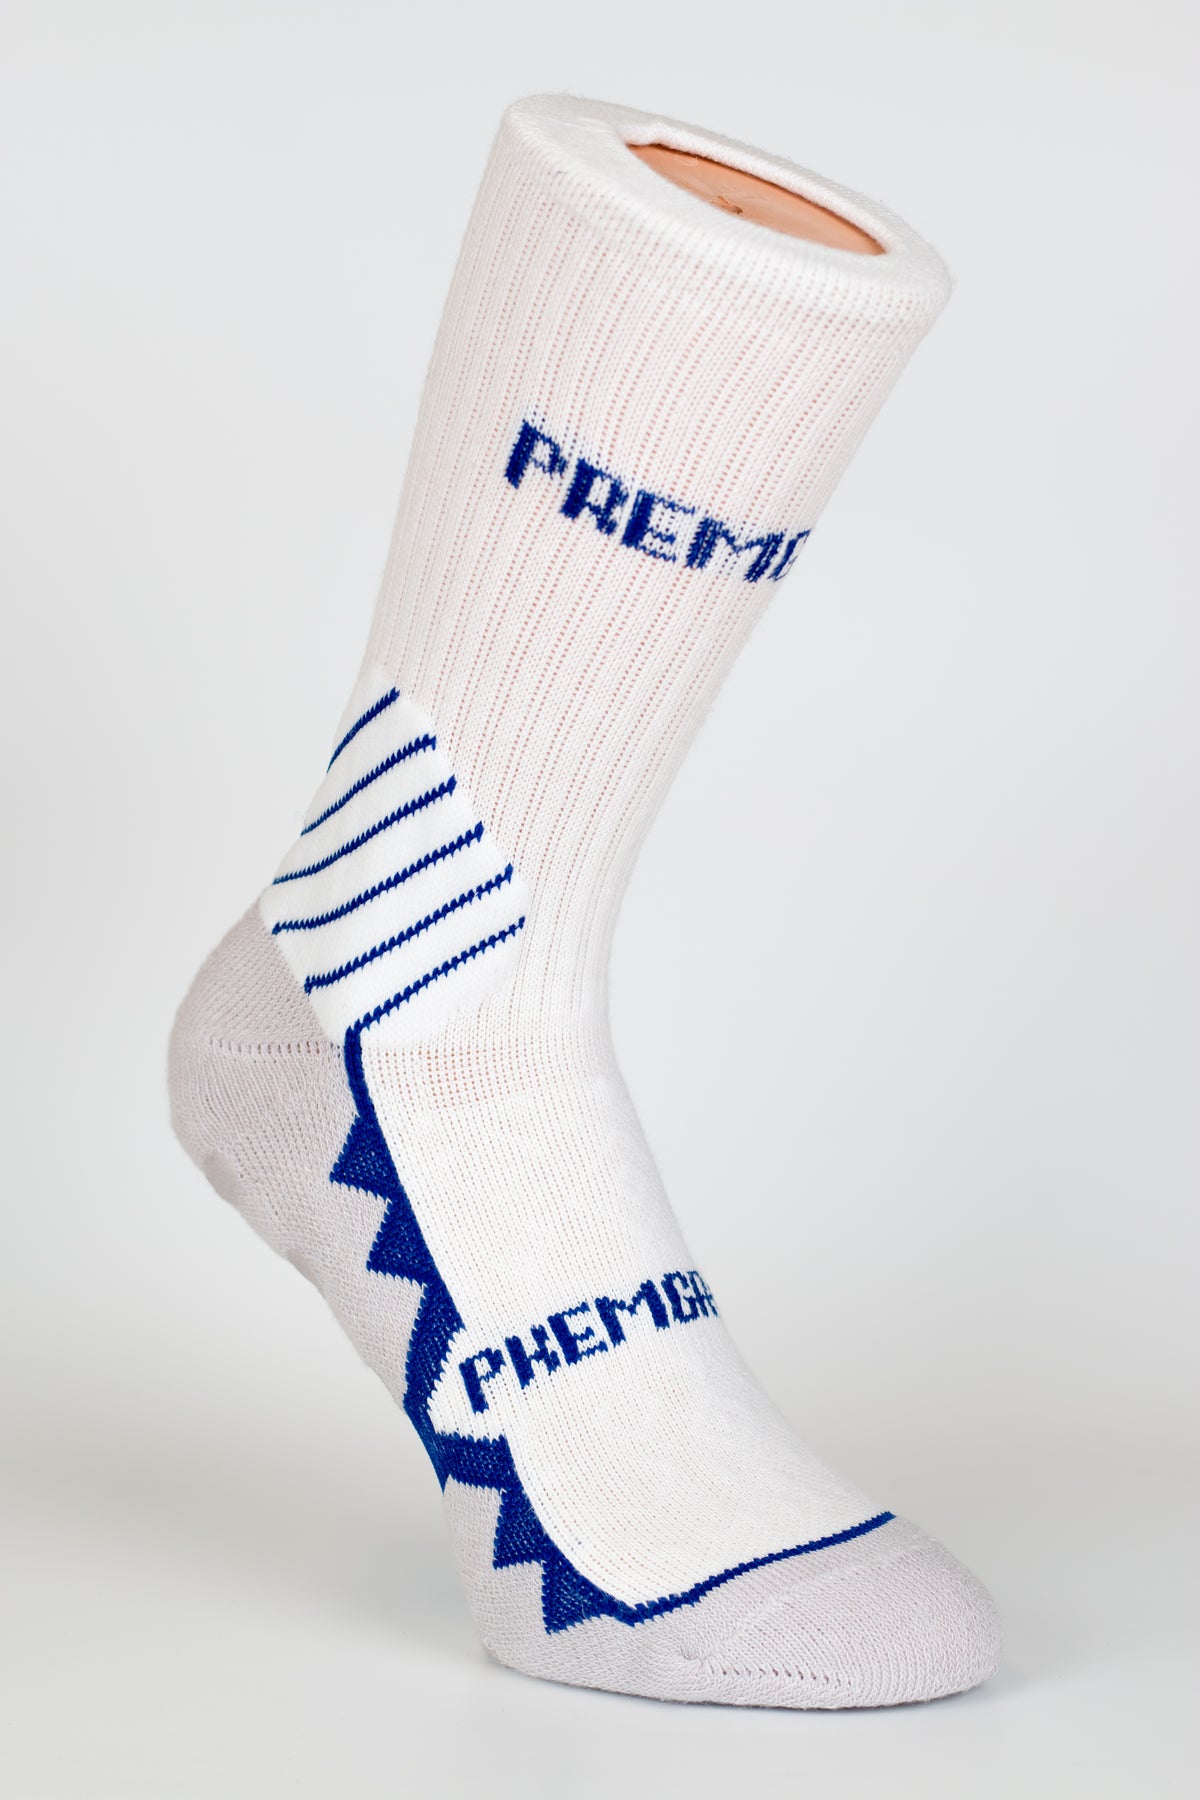 PREMGRIPP CREW SOCK, WITH PATENTED TECHNOLOGY,WHITE/BLUE . - Fanatics Supplies